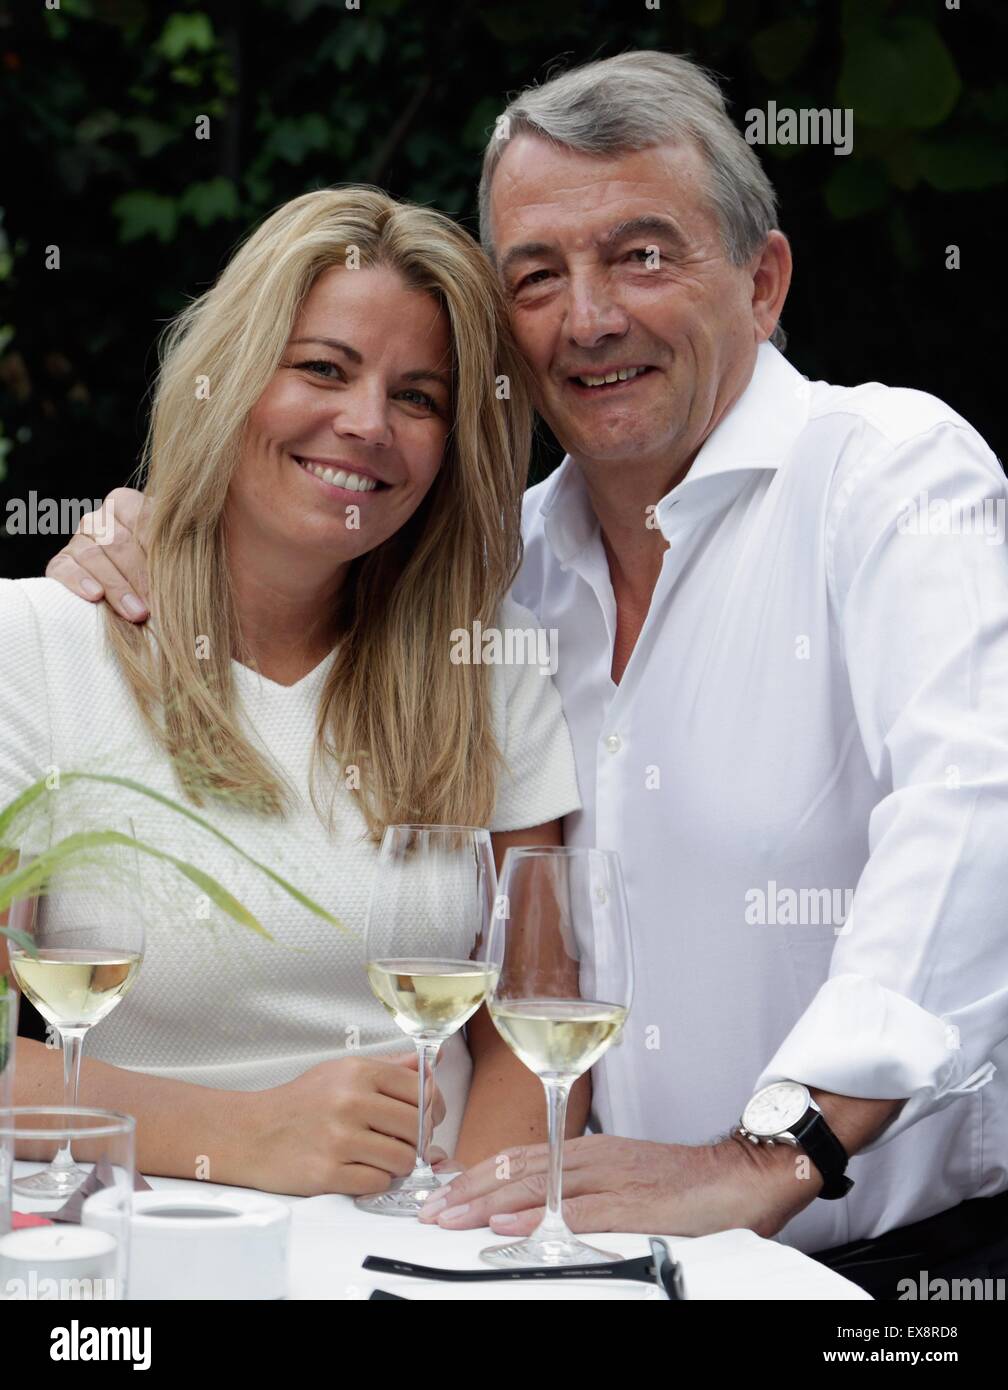 Bolzano, Italy. 8th July, 2015. HANDOUT - BOLZANO, ITALY - JULY 08: Wolfgang Niersbach (R) and his girl friend Marion Popp attend the 2nd evening of the FIFA World Champions of 1990 meeting at Hotel Seeleiten (Kaltern - Caldaro) on July 8, 2015 in Bolzano, Italy. Photo: Johannes Simon/Bongarts/Getty Images/dpa (ACHTUNG: nur zur redaktionellen Nutzung bei Nennung der Quelle: «Photo: Johannes Simon/Bongarts/Getty Images/dpa»)/dpa/Alamy Live News Stock Photo